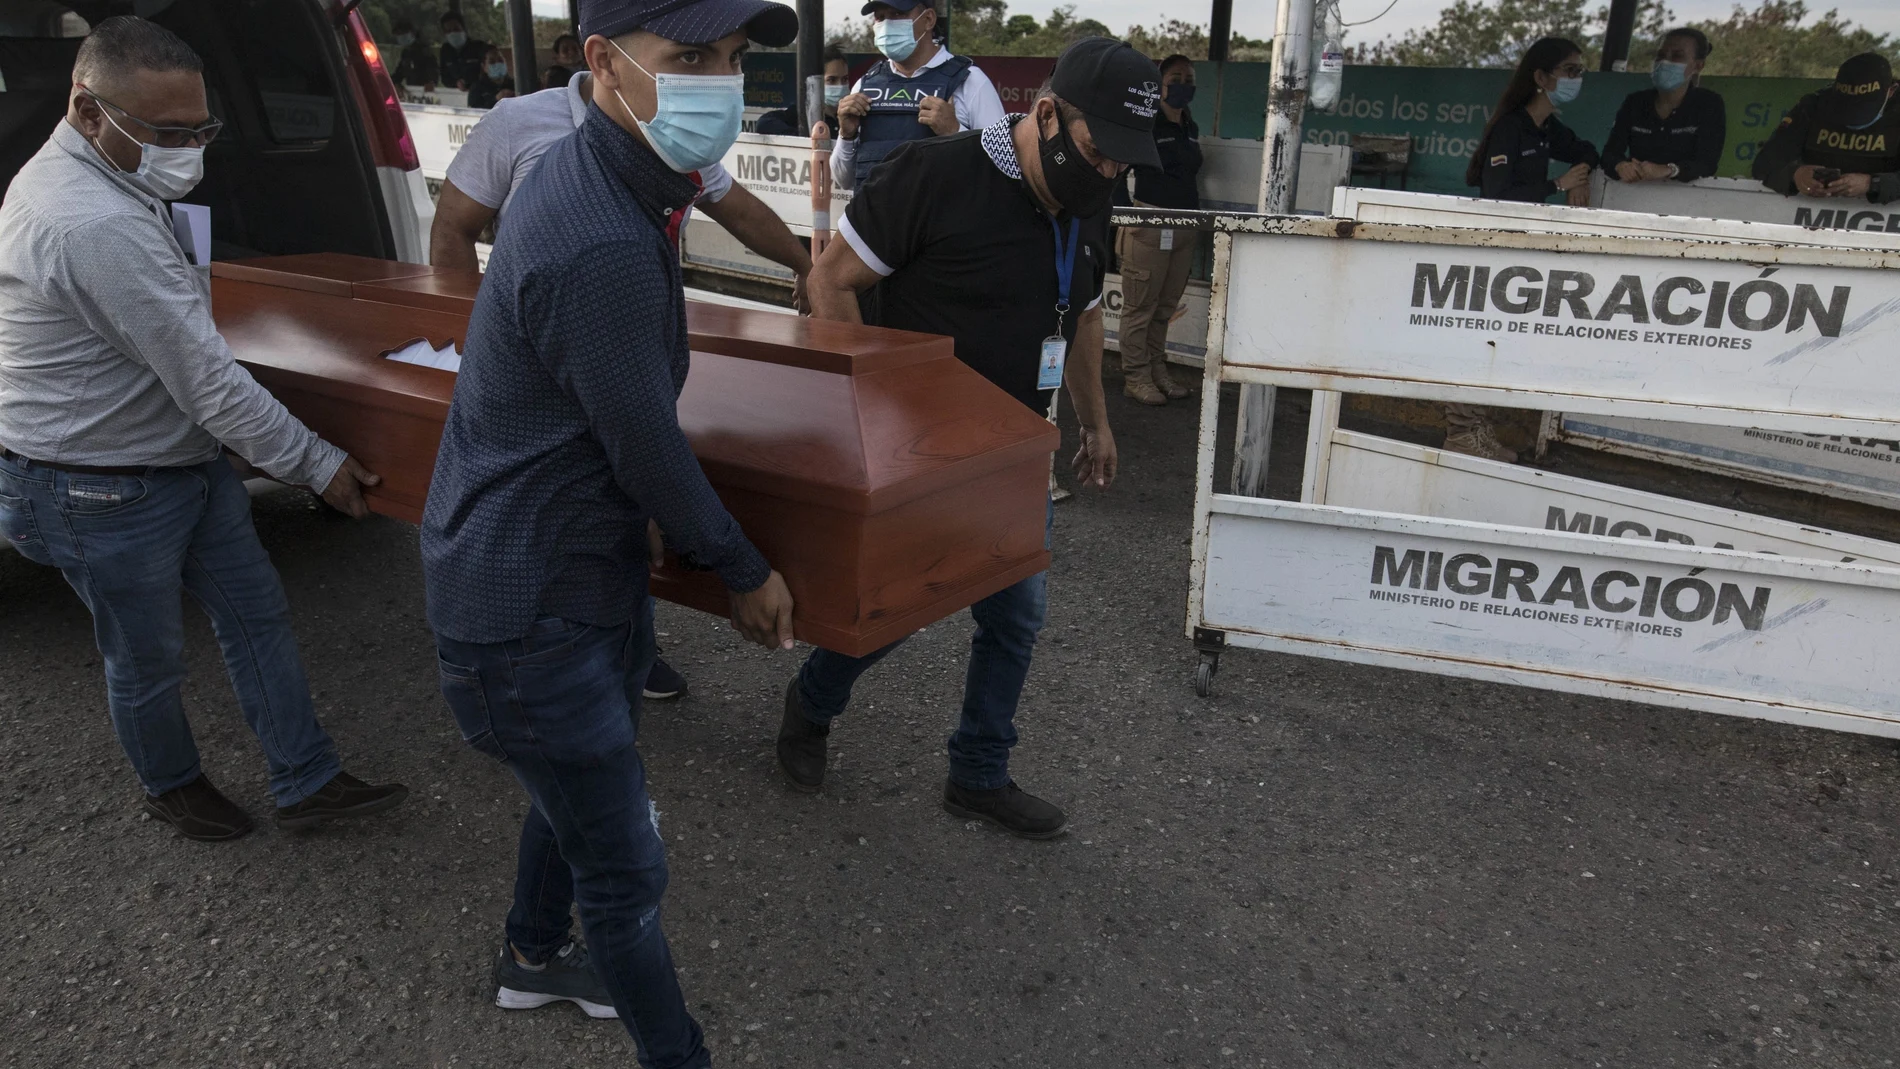 Venezuelans return to their country with the remains of a relative who died in Colombia, through the Simon Bolivar International Bridge as they leave La Parada near Cucuta, Colombia,Â Colombia, Tuesday, Oct. 5, 2021. Venezuela partially reopened its border with Colombia after closing it in 2019, a nearly three-year closure, due to political tensions. (AP Photo/Ivan Valencia)